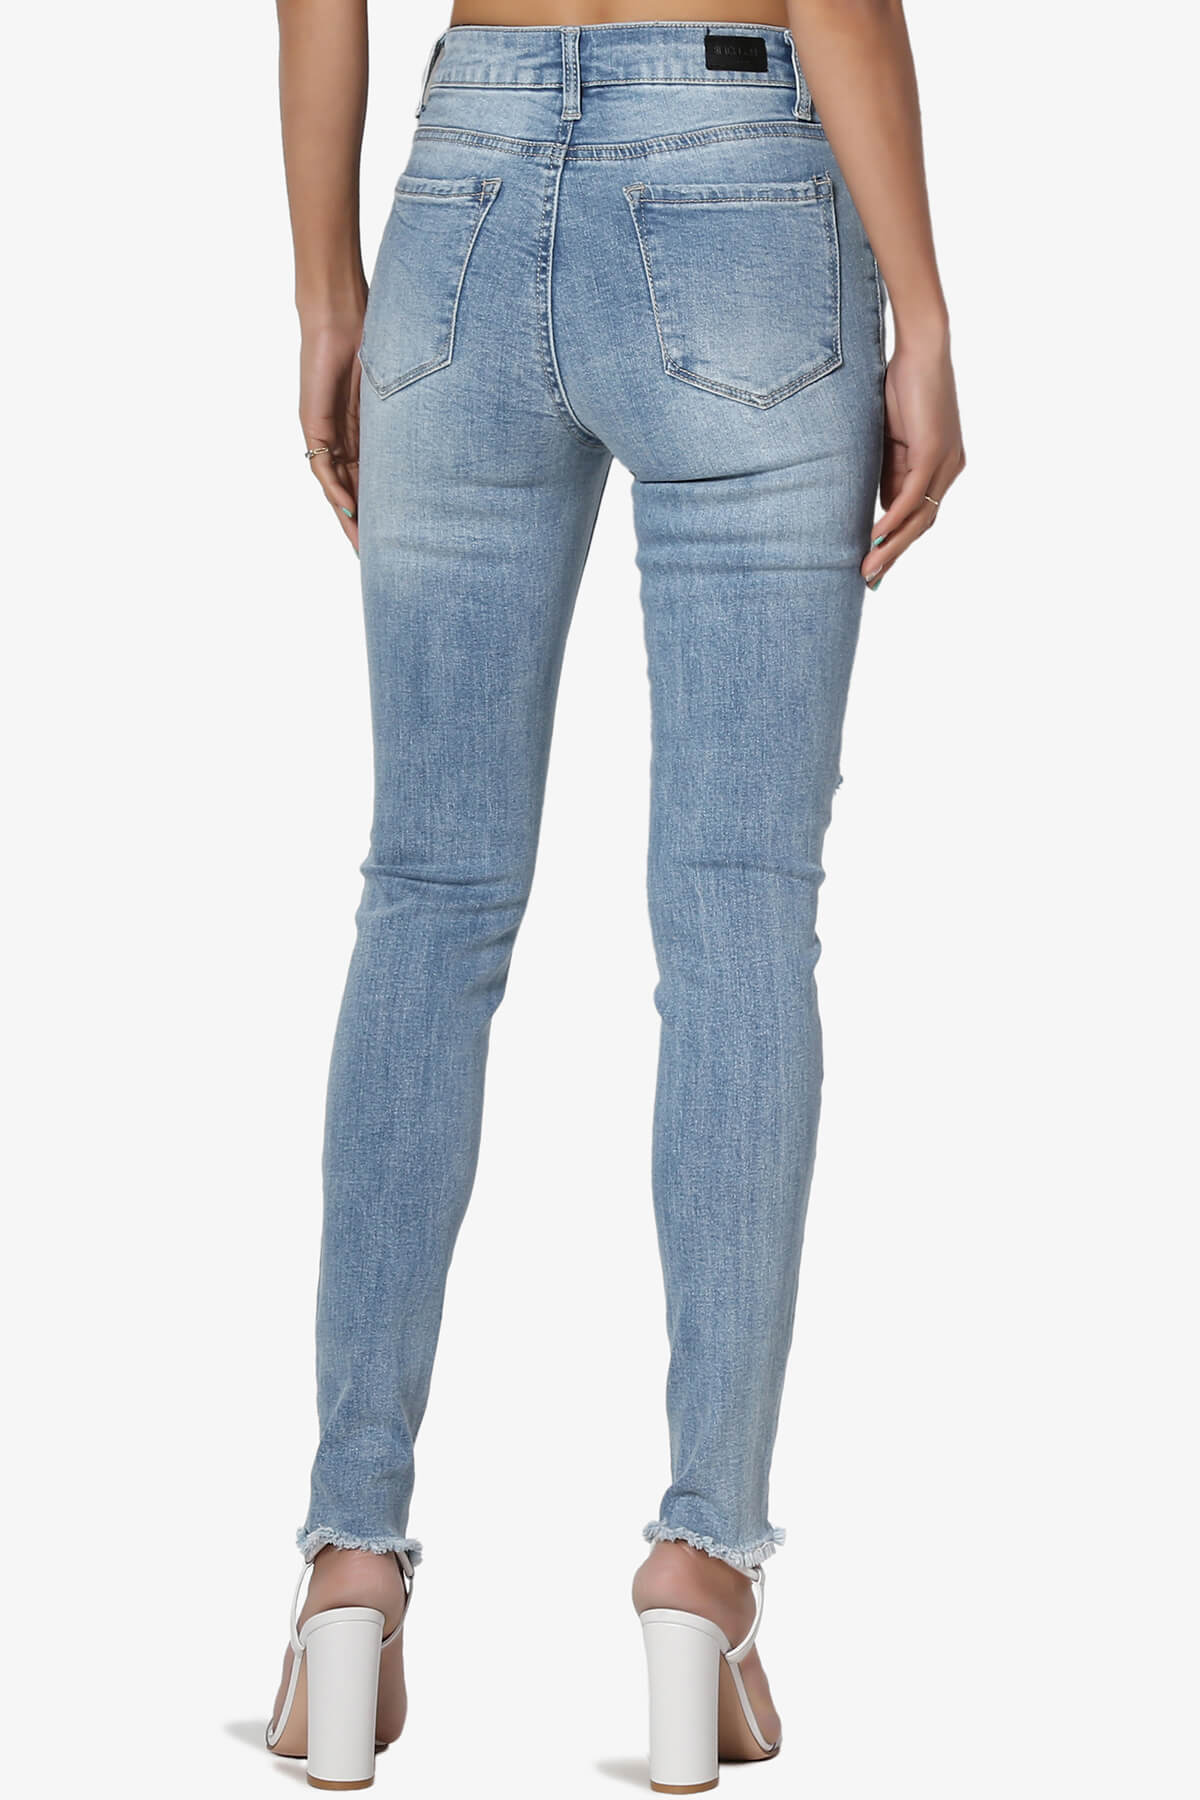 Load image into Gallery viewer, Rosalind Mid Rise Distressed Skinny Jeans LIGHT_2
